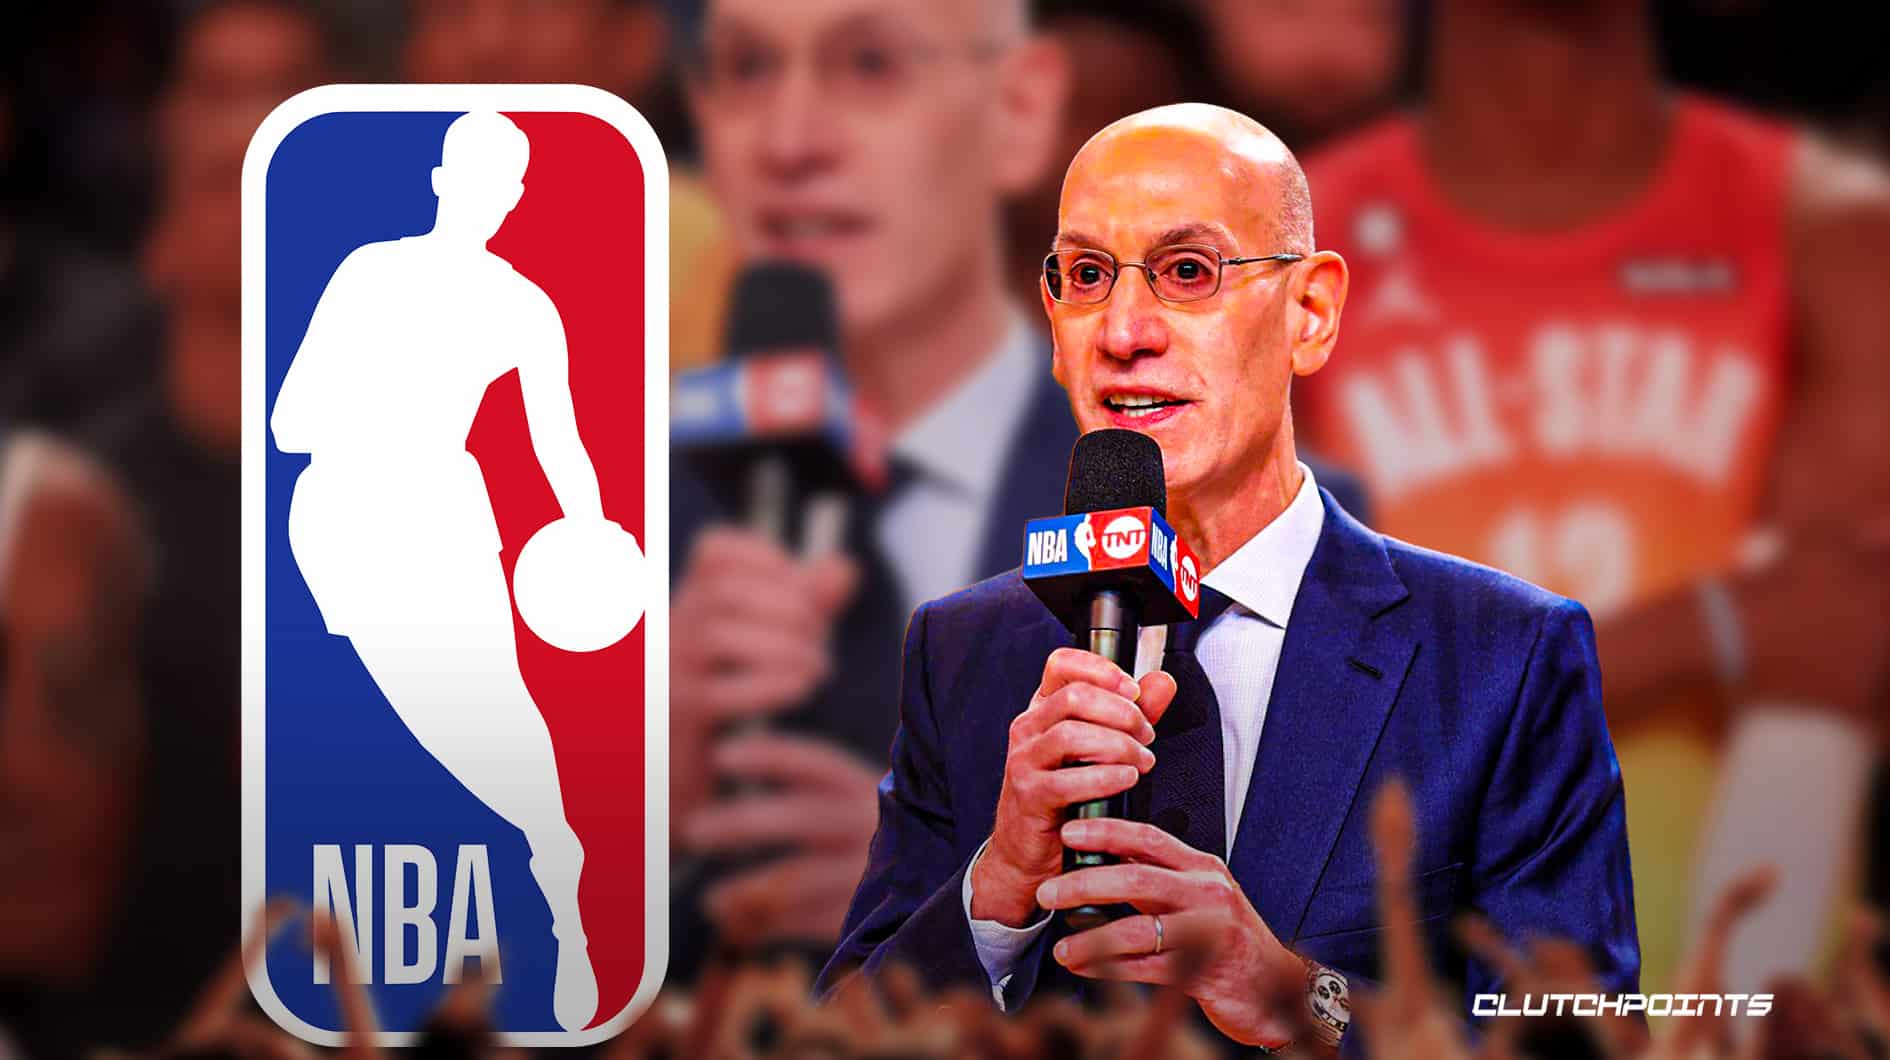 NBA's major flop penalty highlights 202324 rule changes